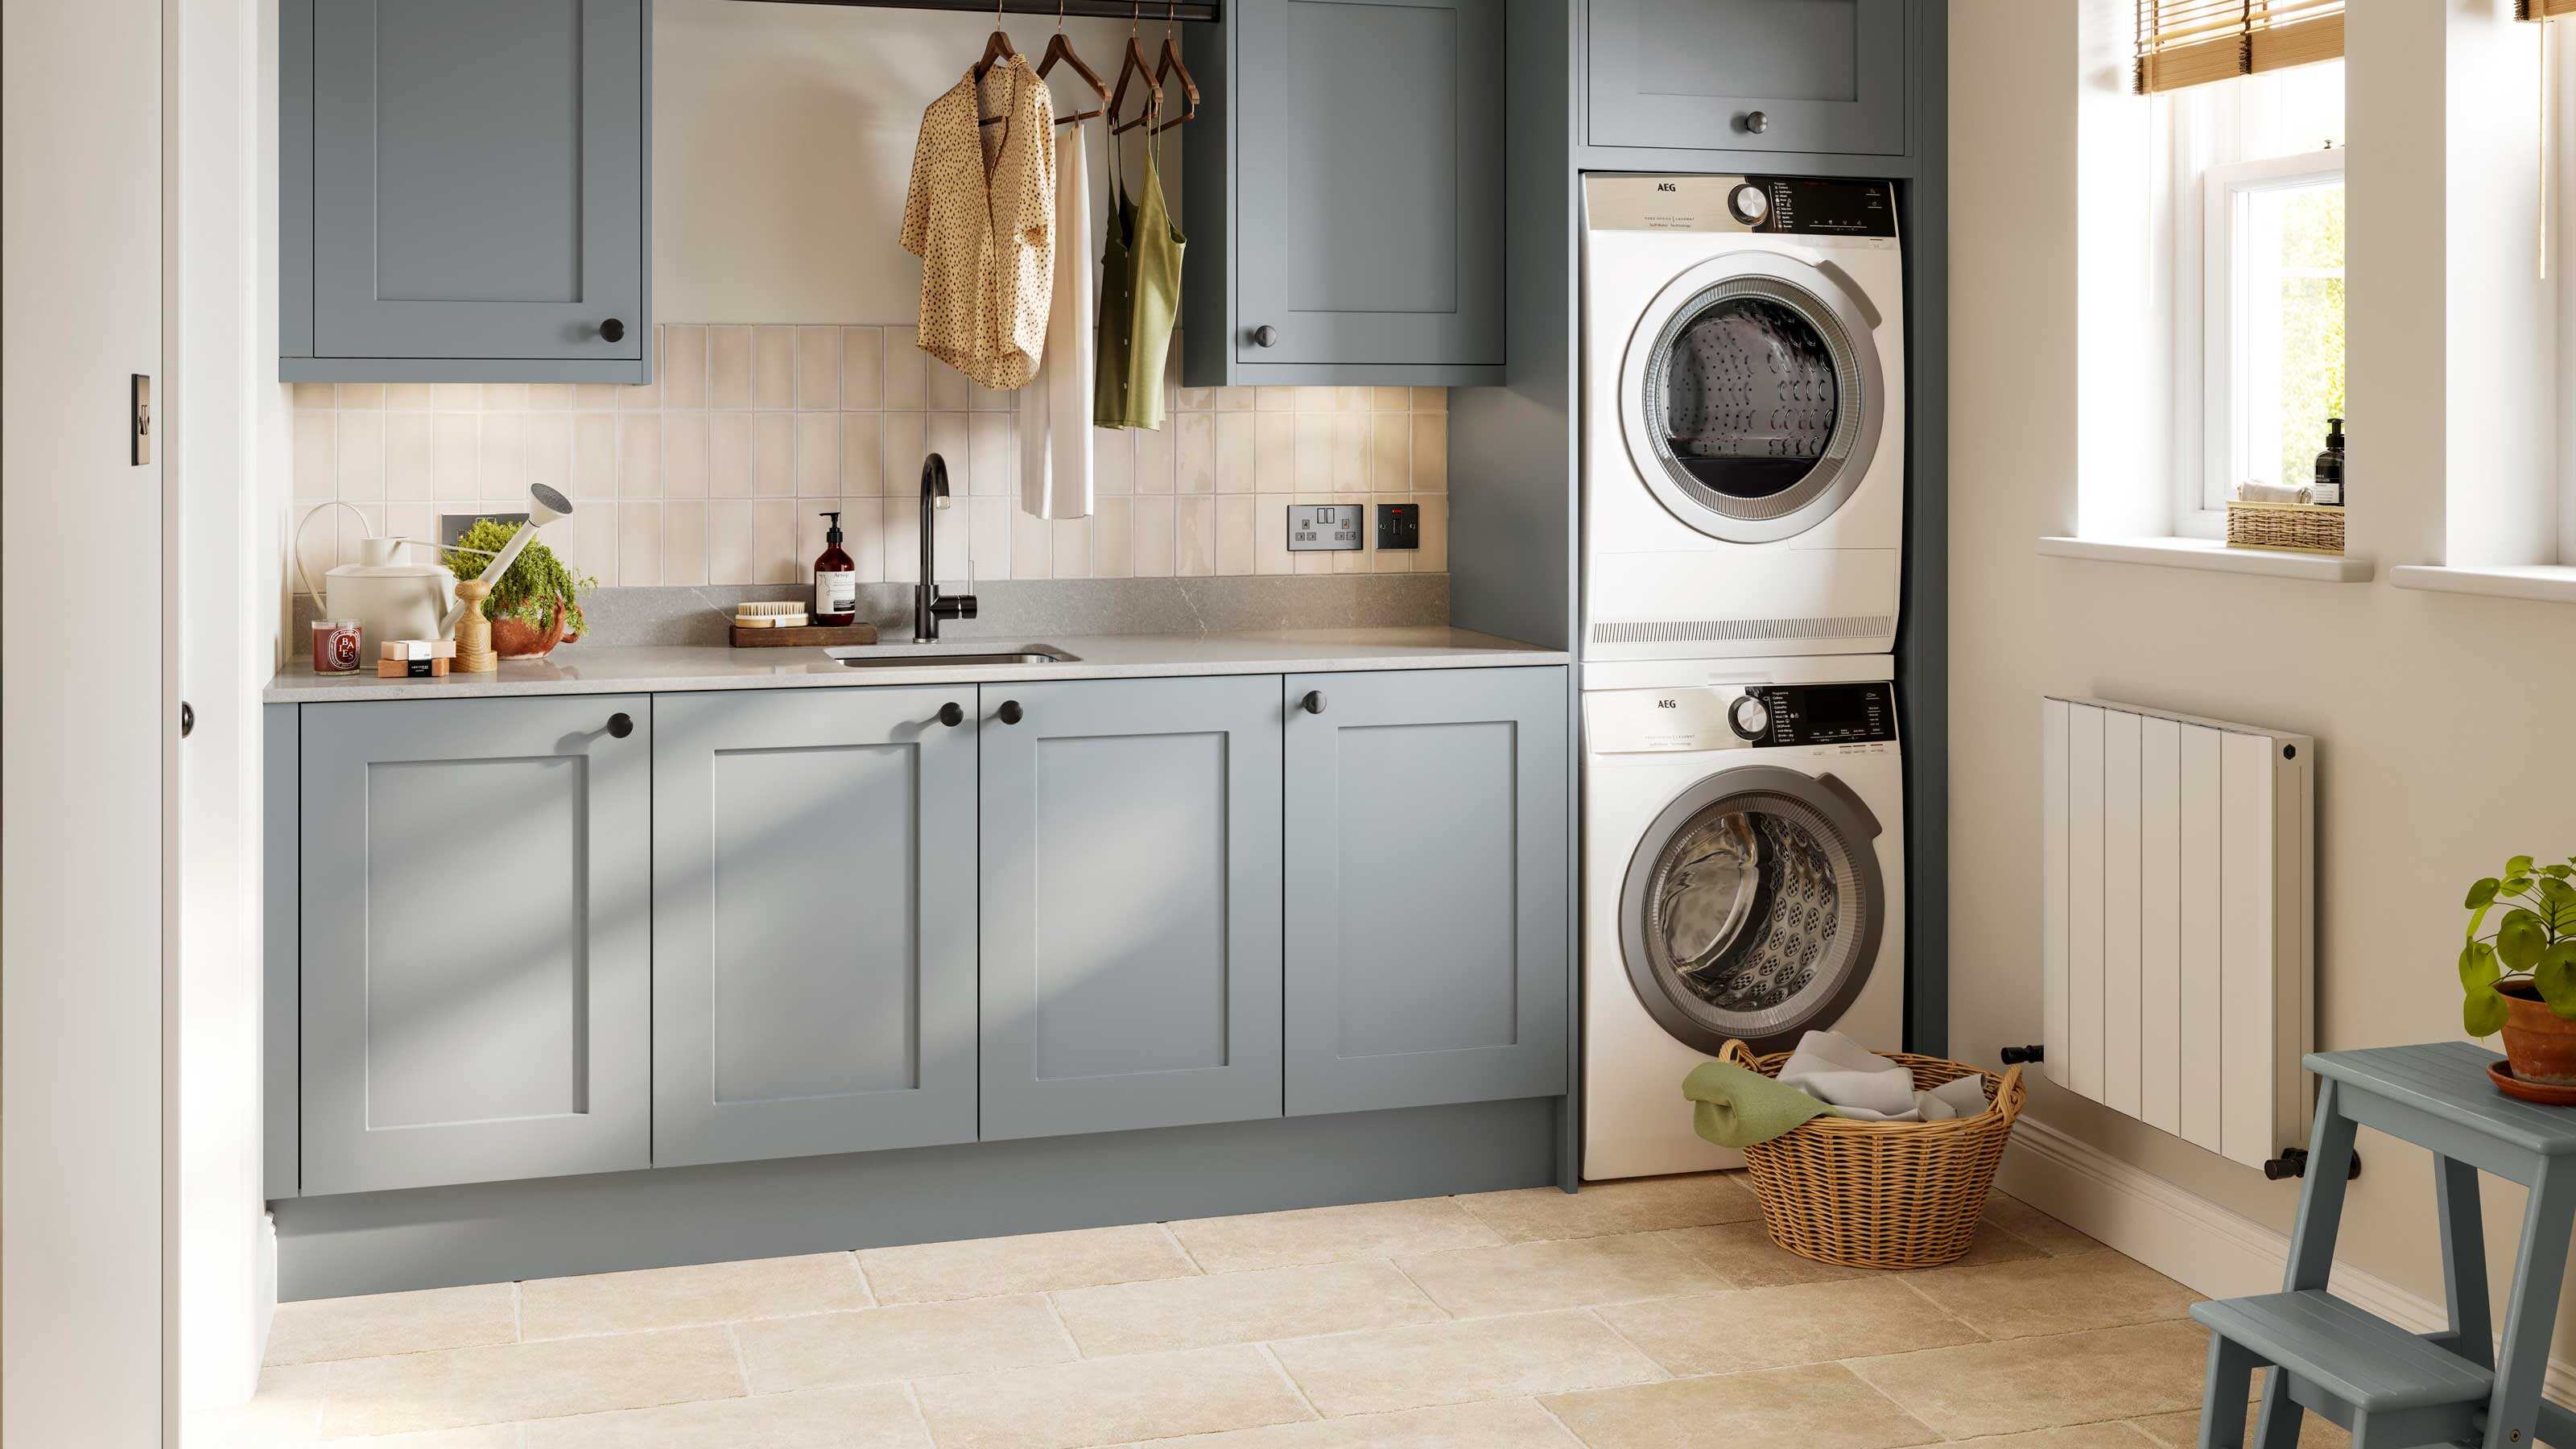 How To Reduce Humidity In Laundry Room